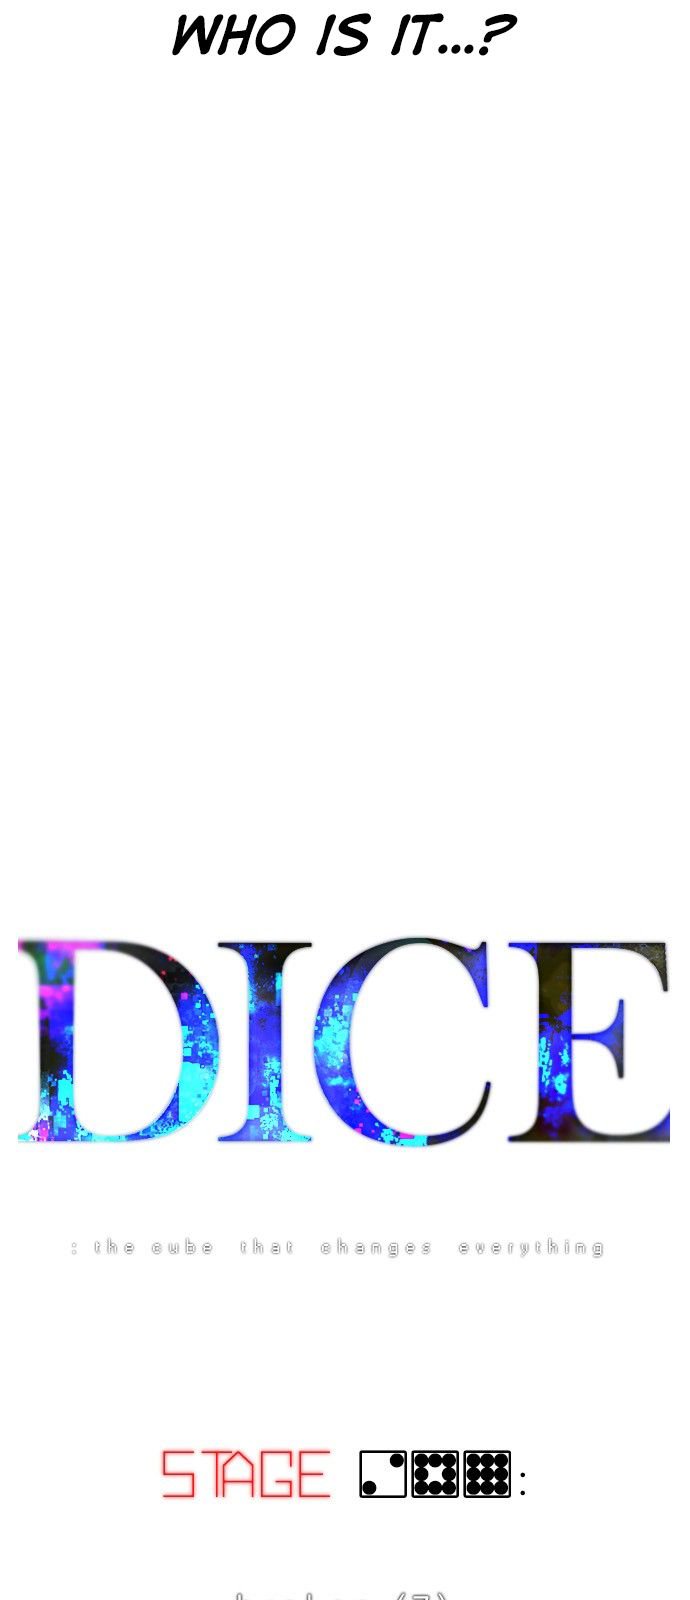 dice_the_cube_that_changes_everything_289_4